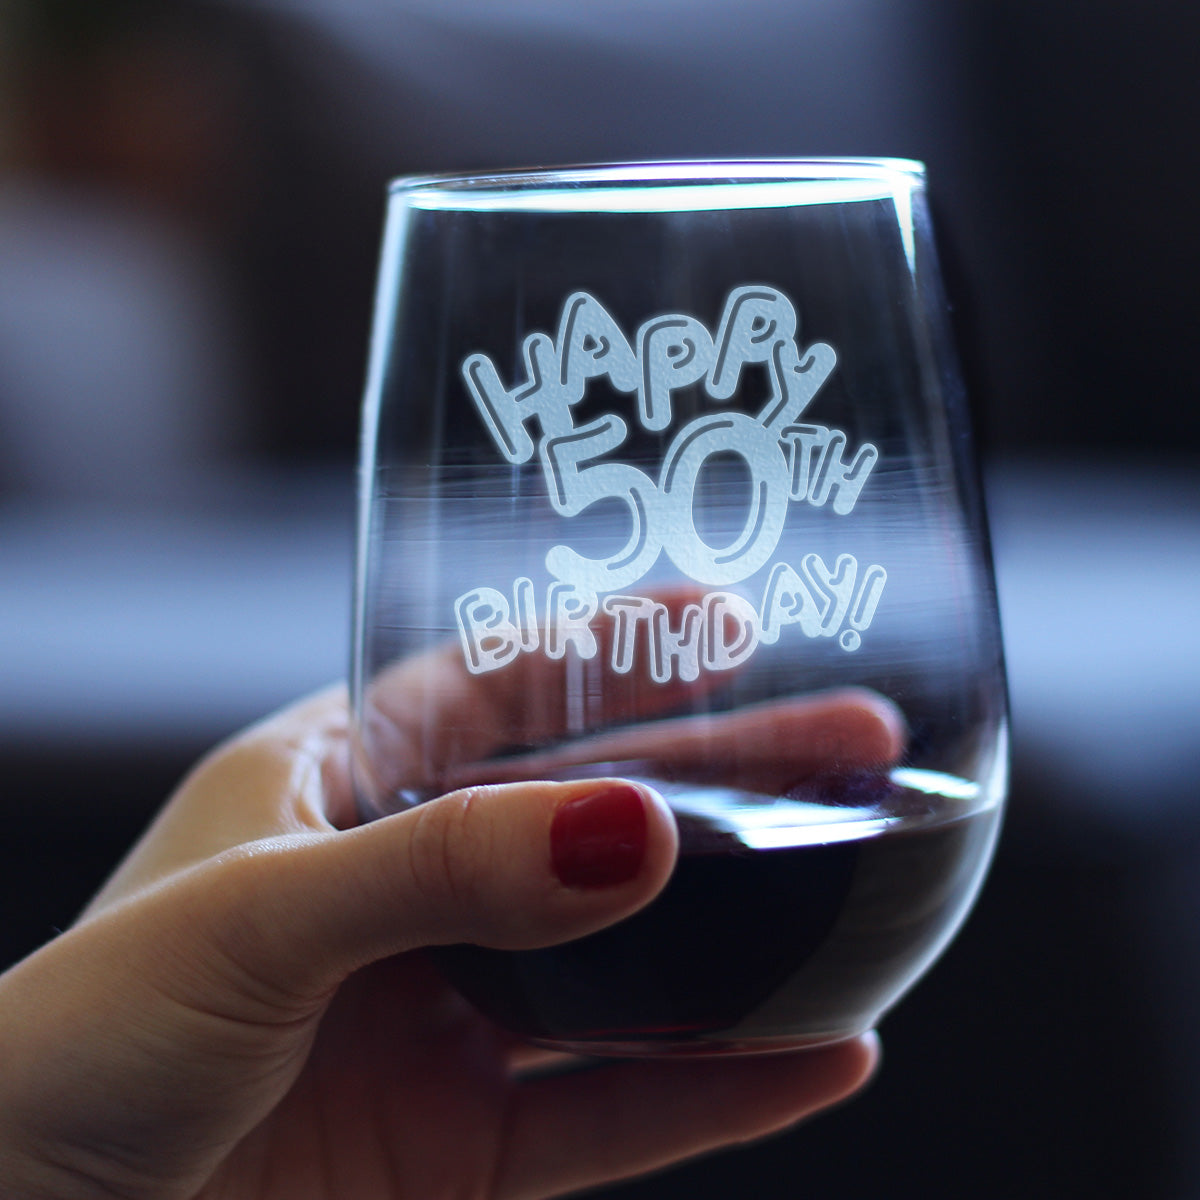 Happy 50th Birthday Balloons - Stemless Wine Glass Gifts for Women &amp; Men Turning 50 - Bday Party Decor - Large Glasses 17 Oz